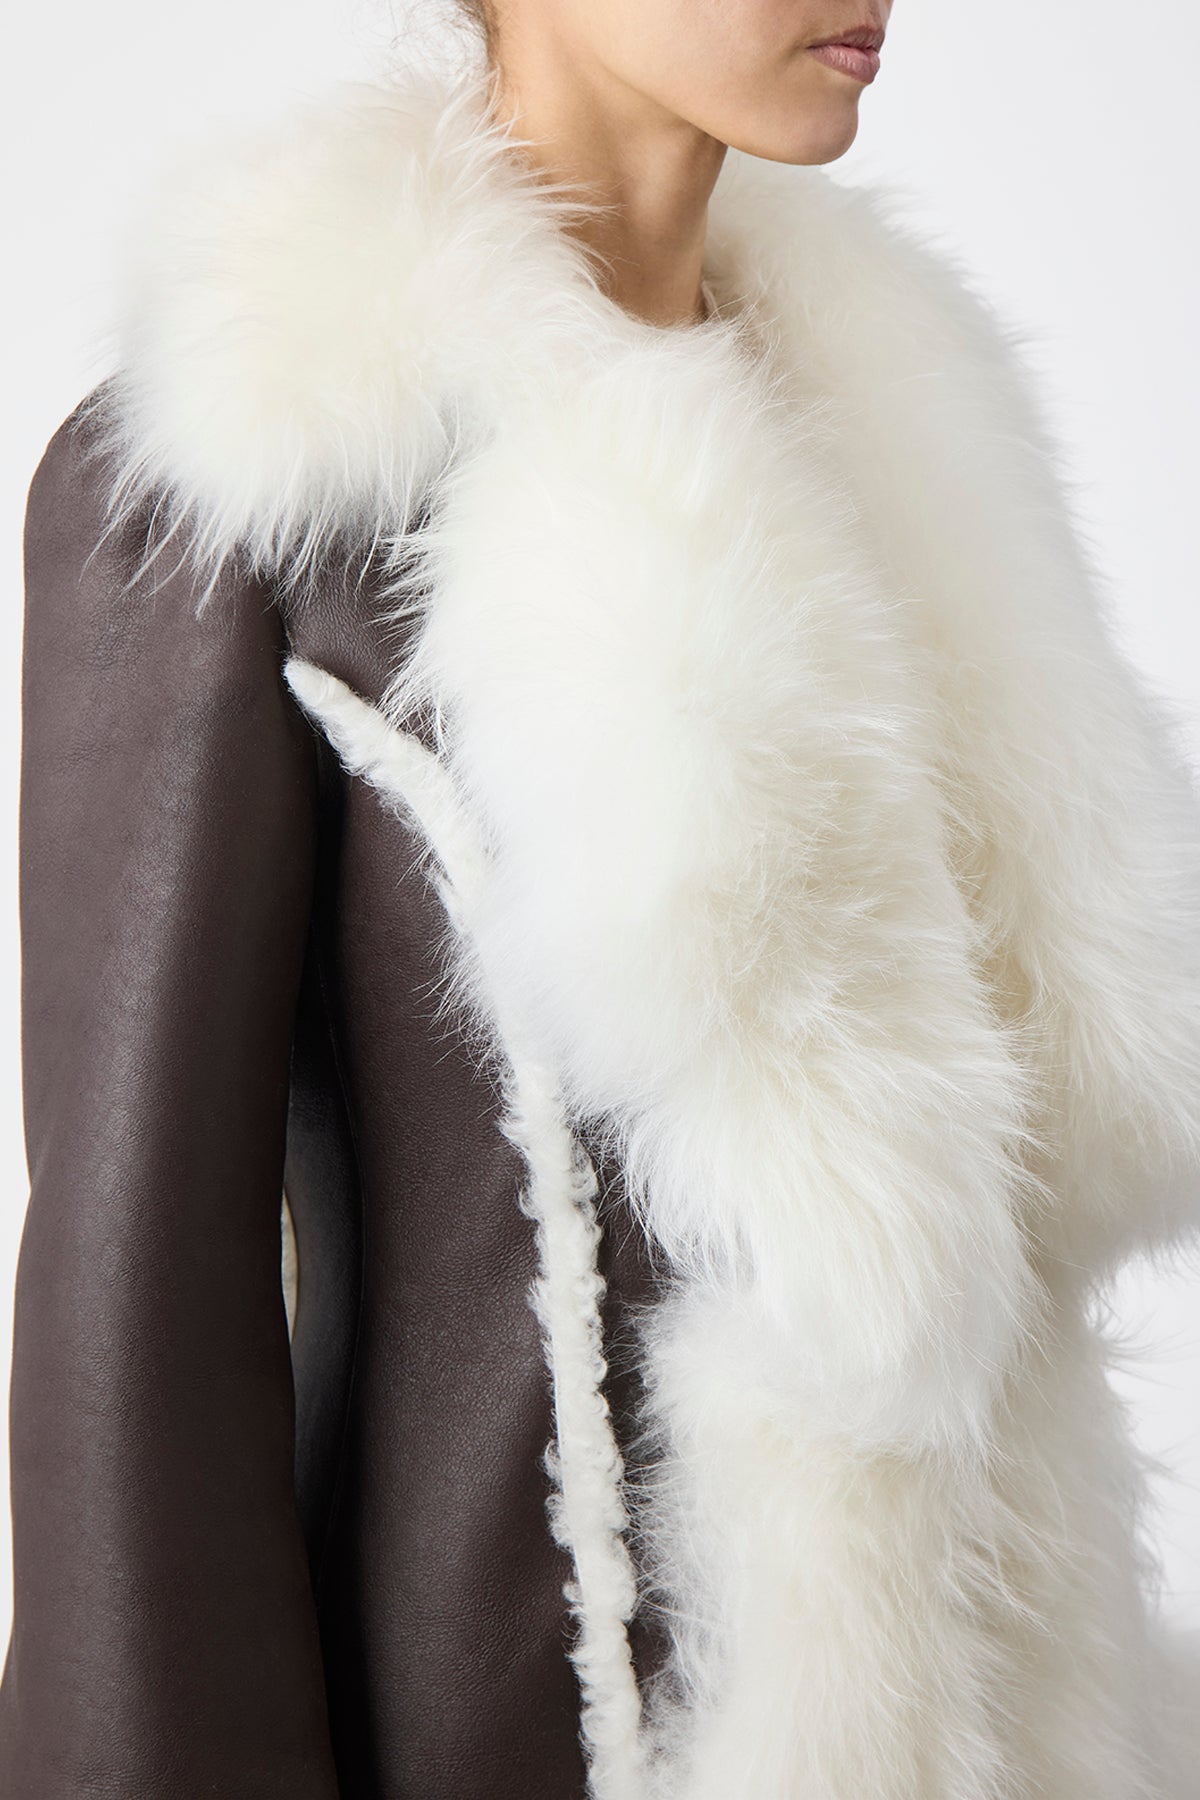 Prufrock Coat in Chocolate & Ivory Cashmere Shearling with Nappa Leather